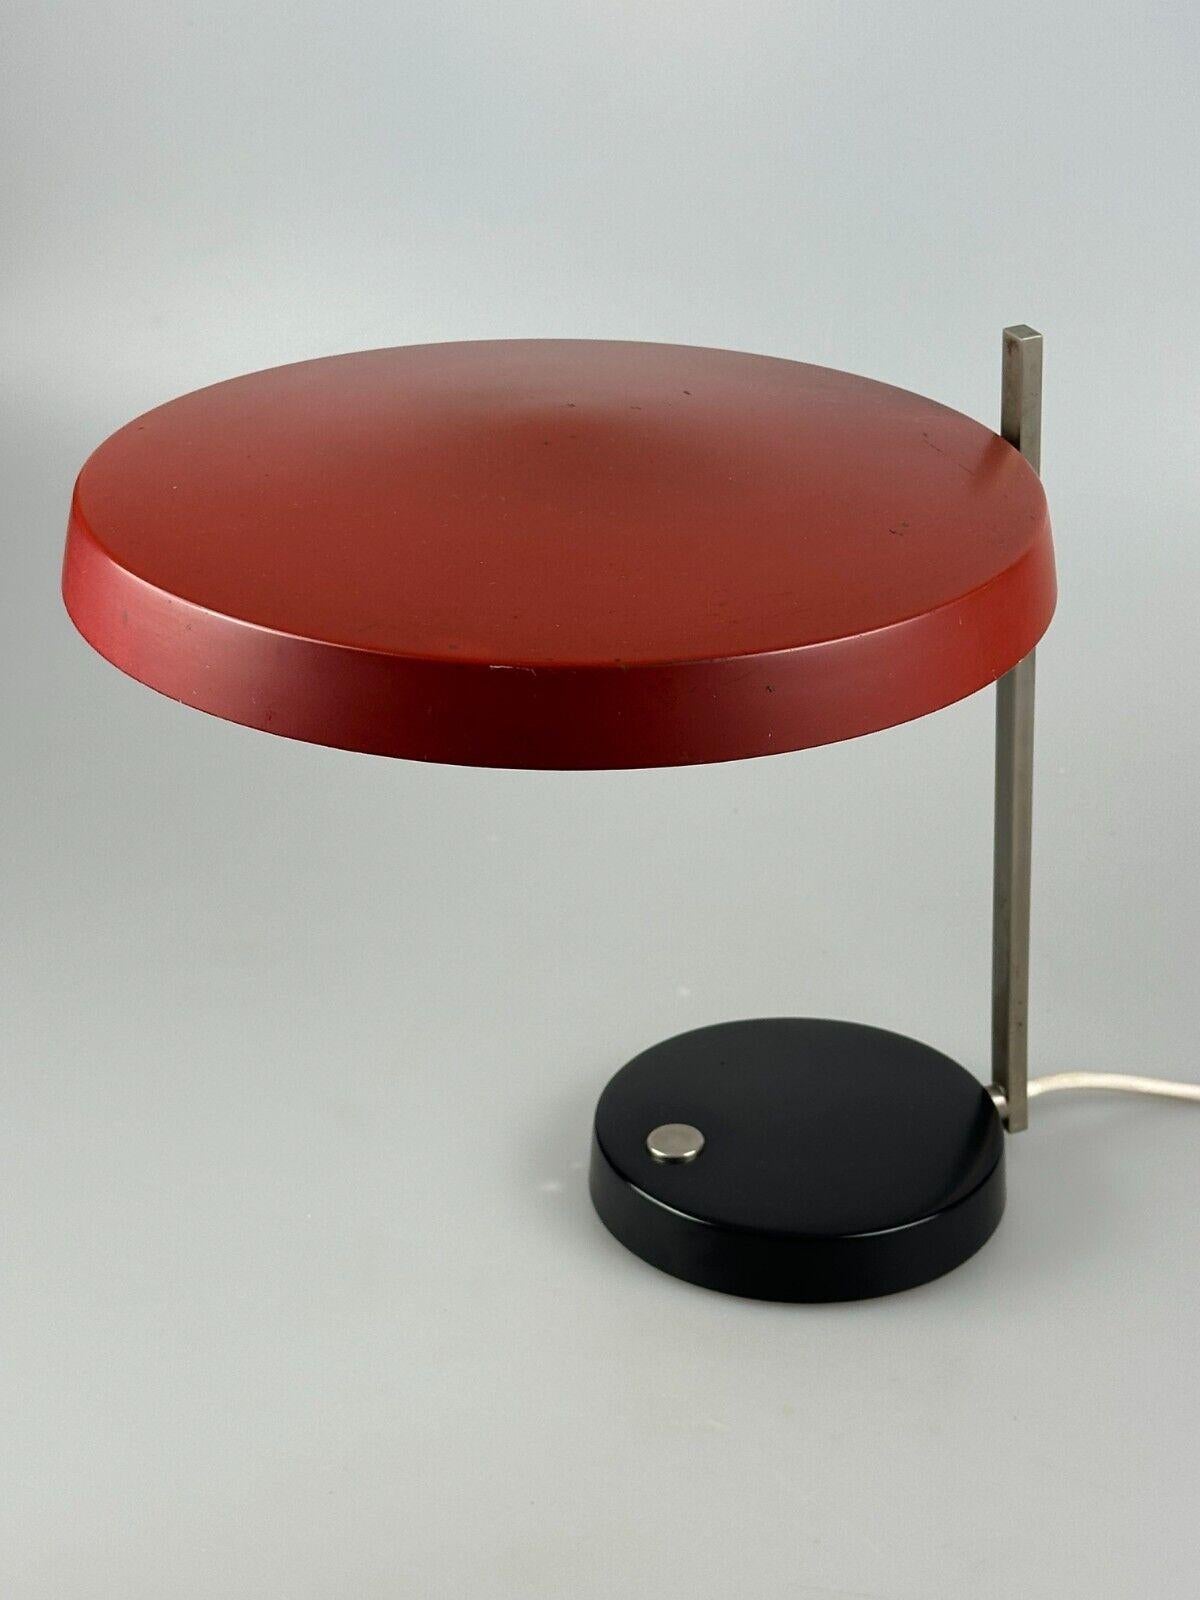 60s 70s table lamp desk lamp by Heinz Pfänder for Hillebrand In Good Condition For Sale In Neuenkirchen, NI